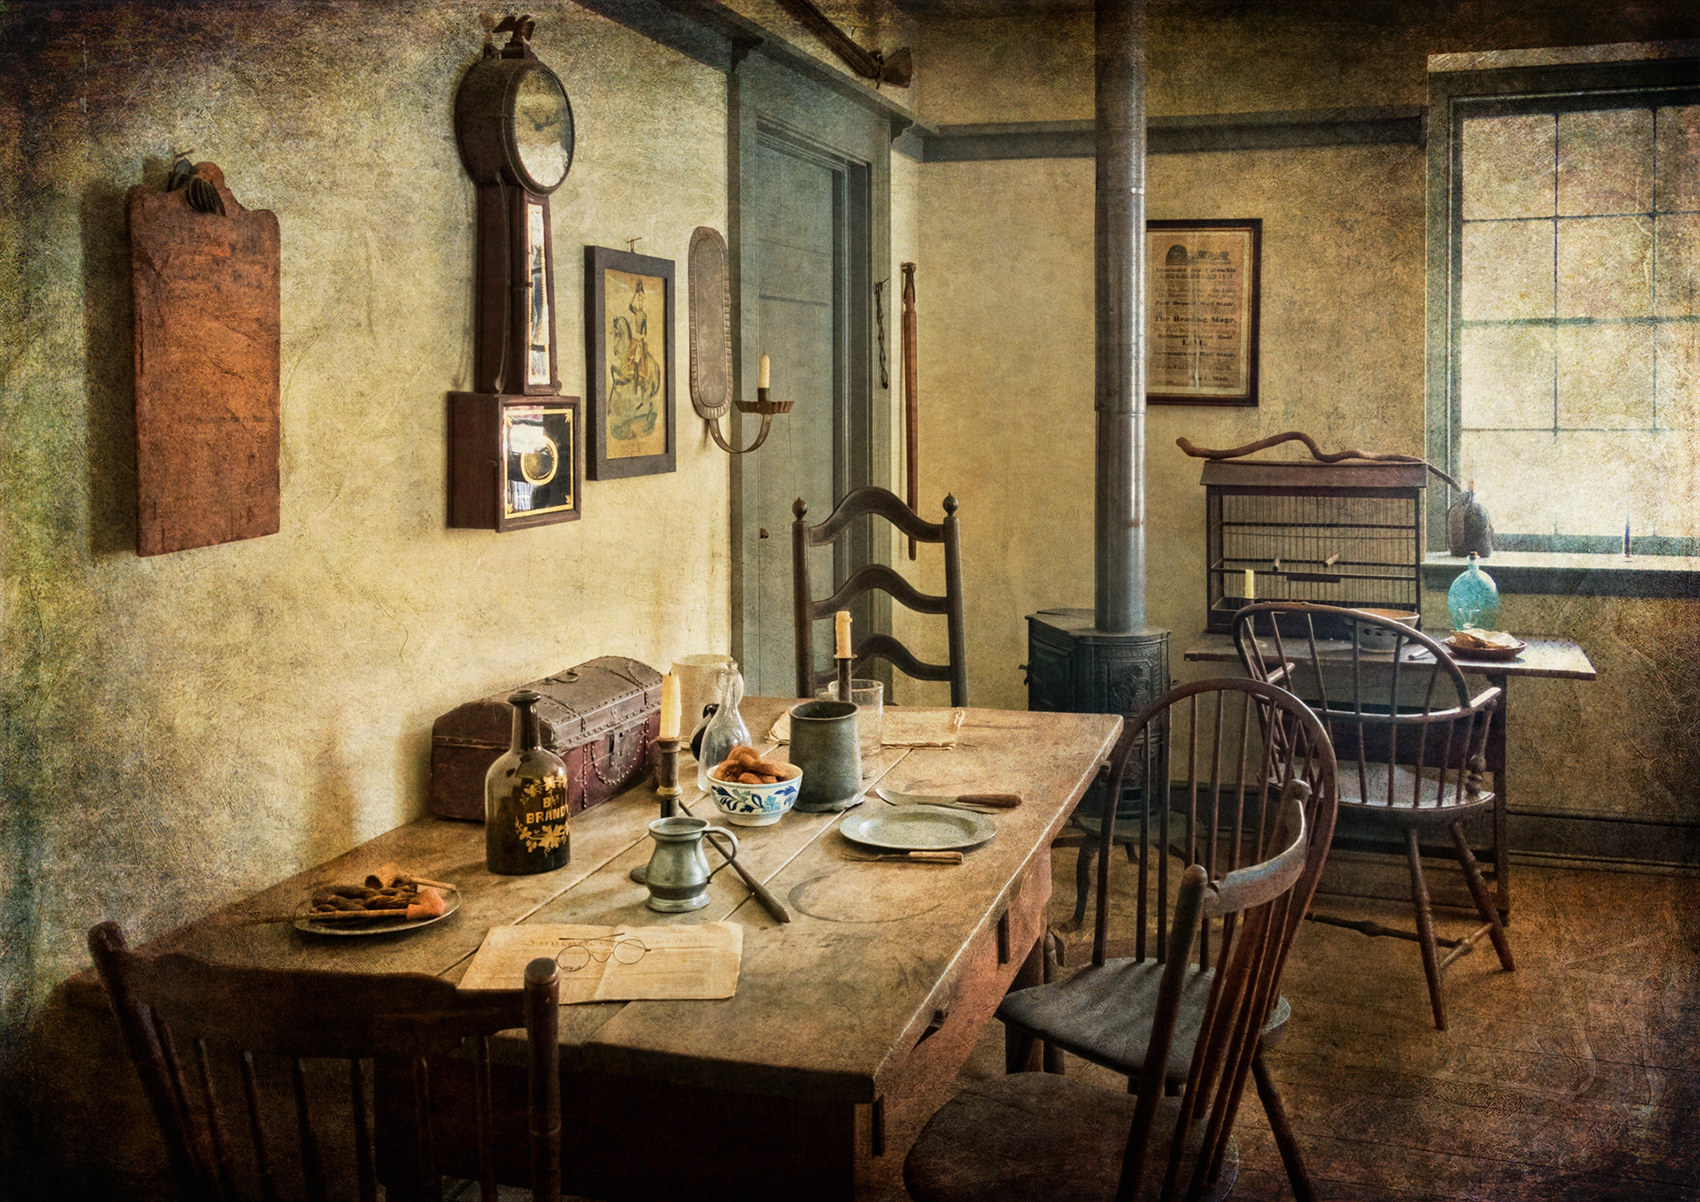 A dining room with older wooden furniture